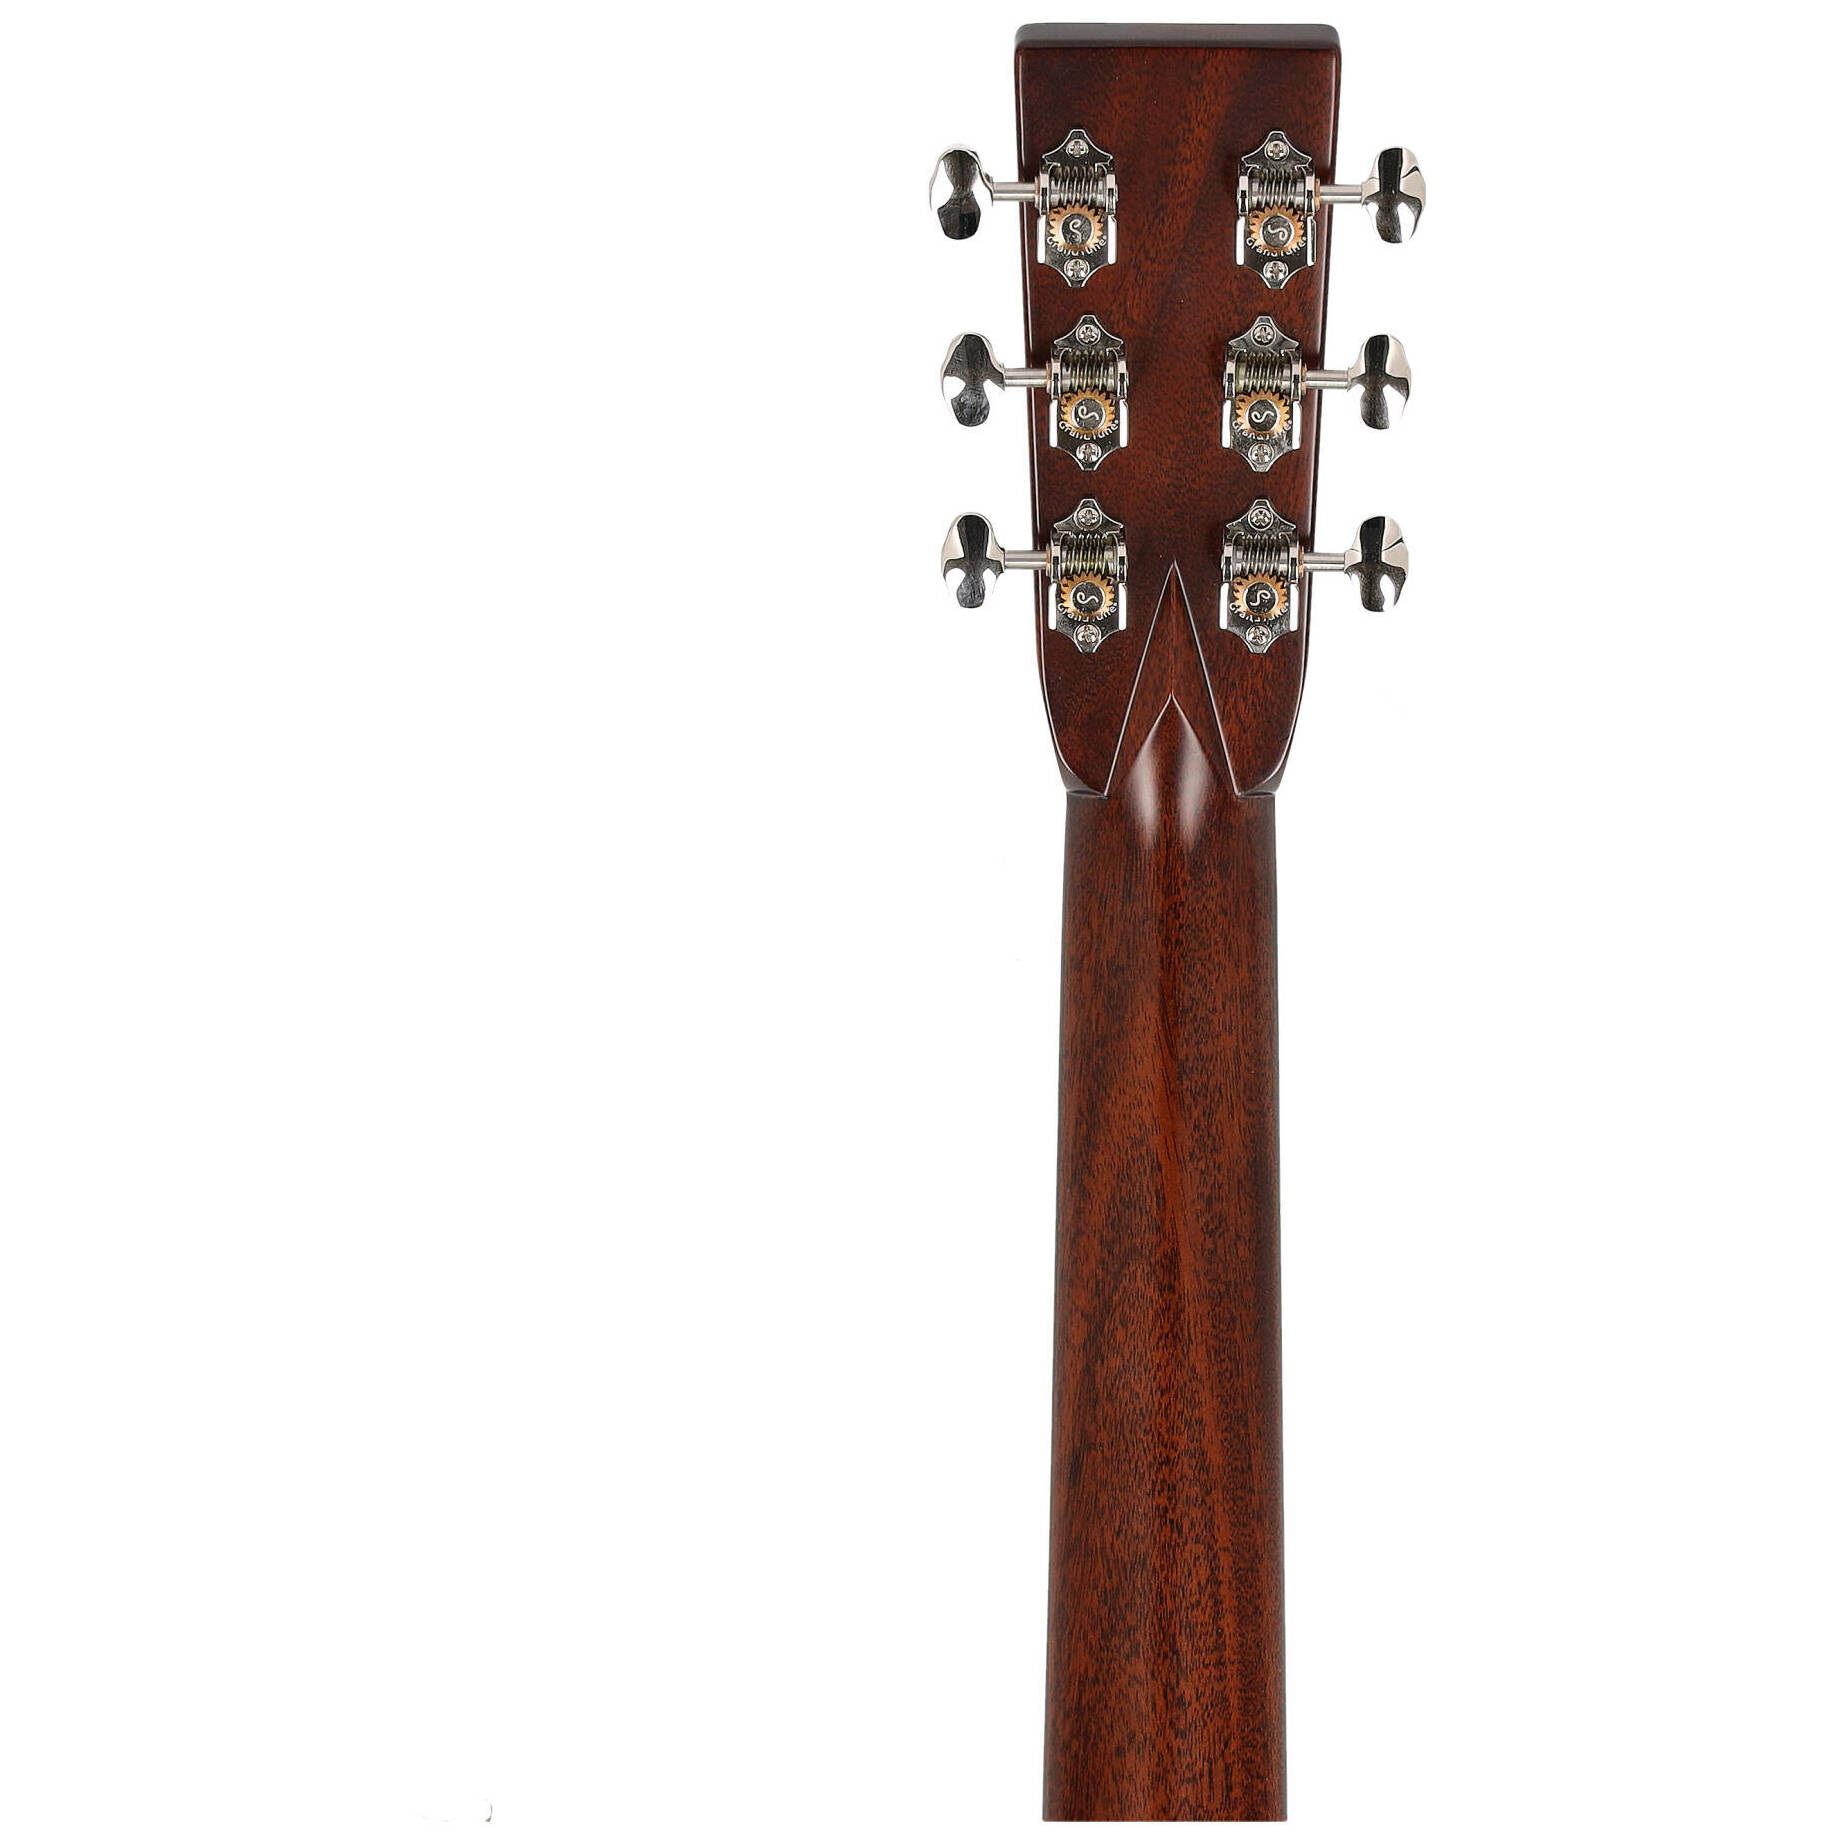 Bourgeois Guitars OM CountryBoy Touchstone 6